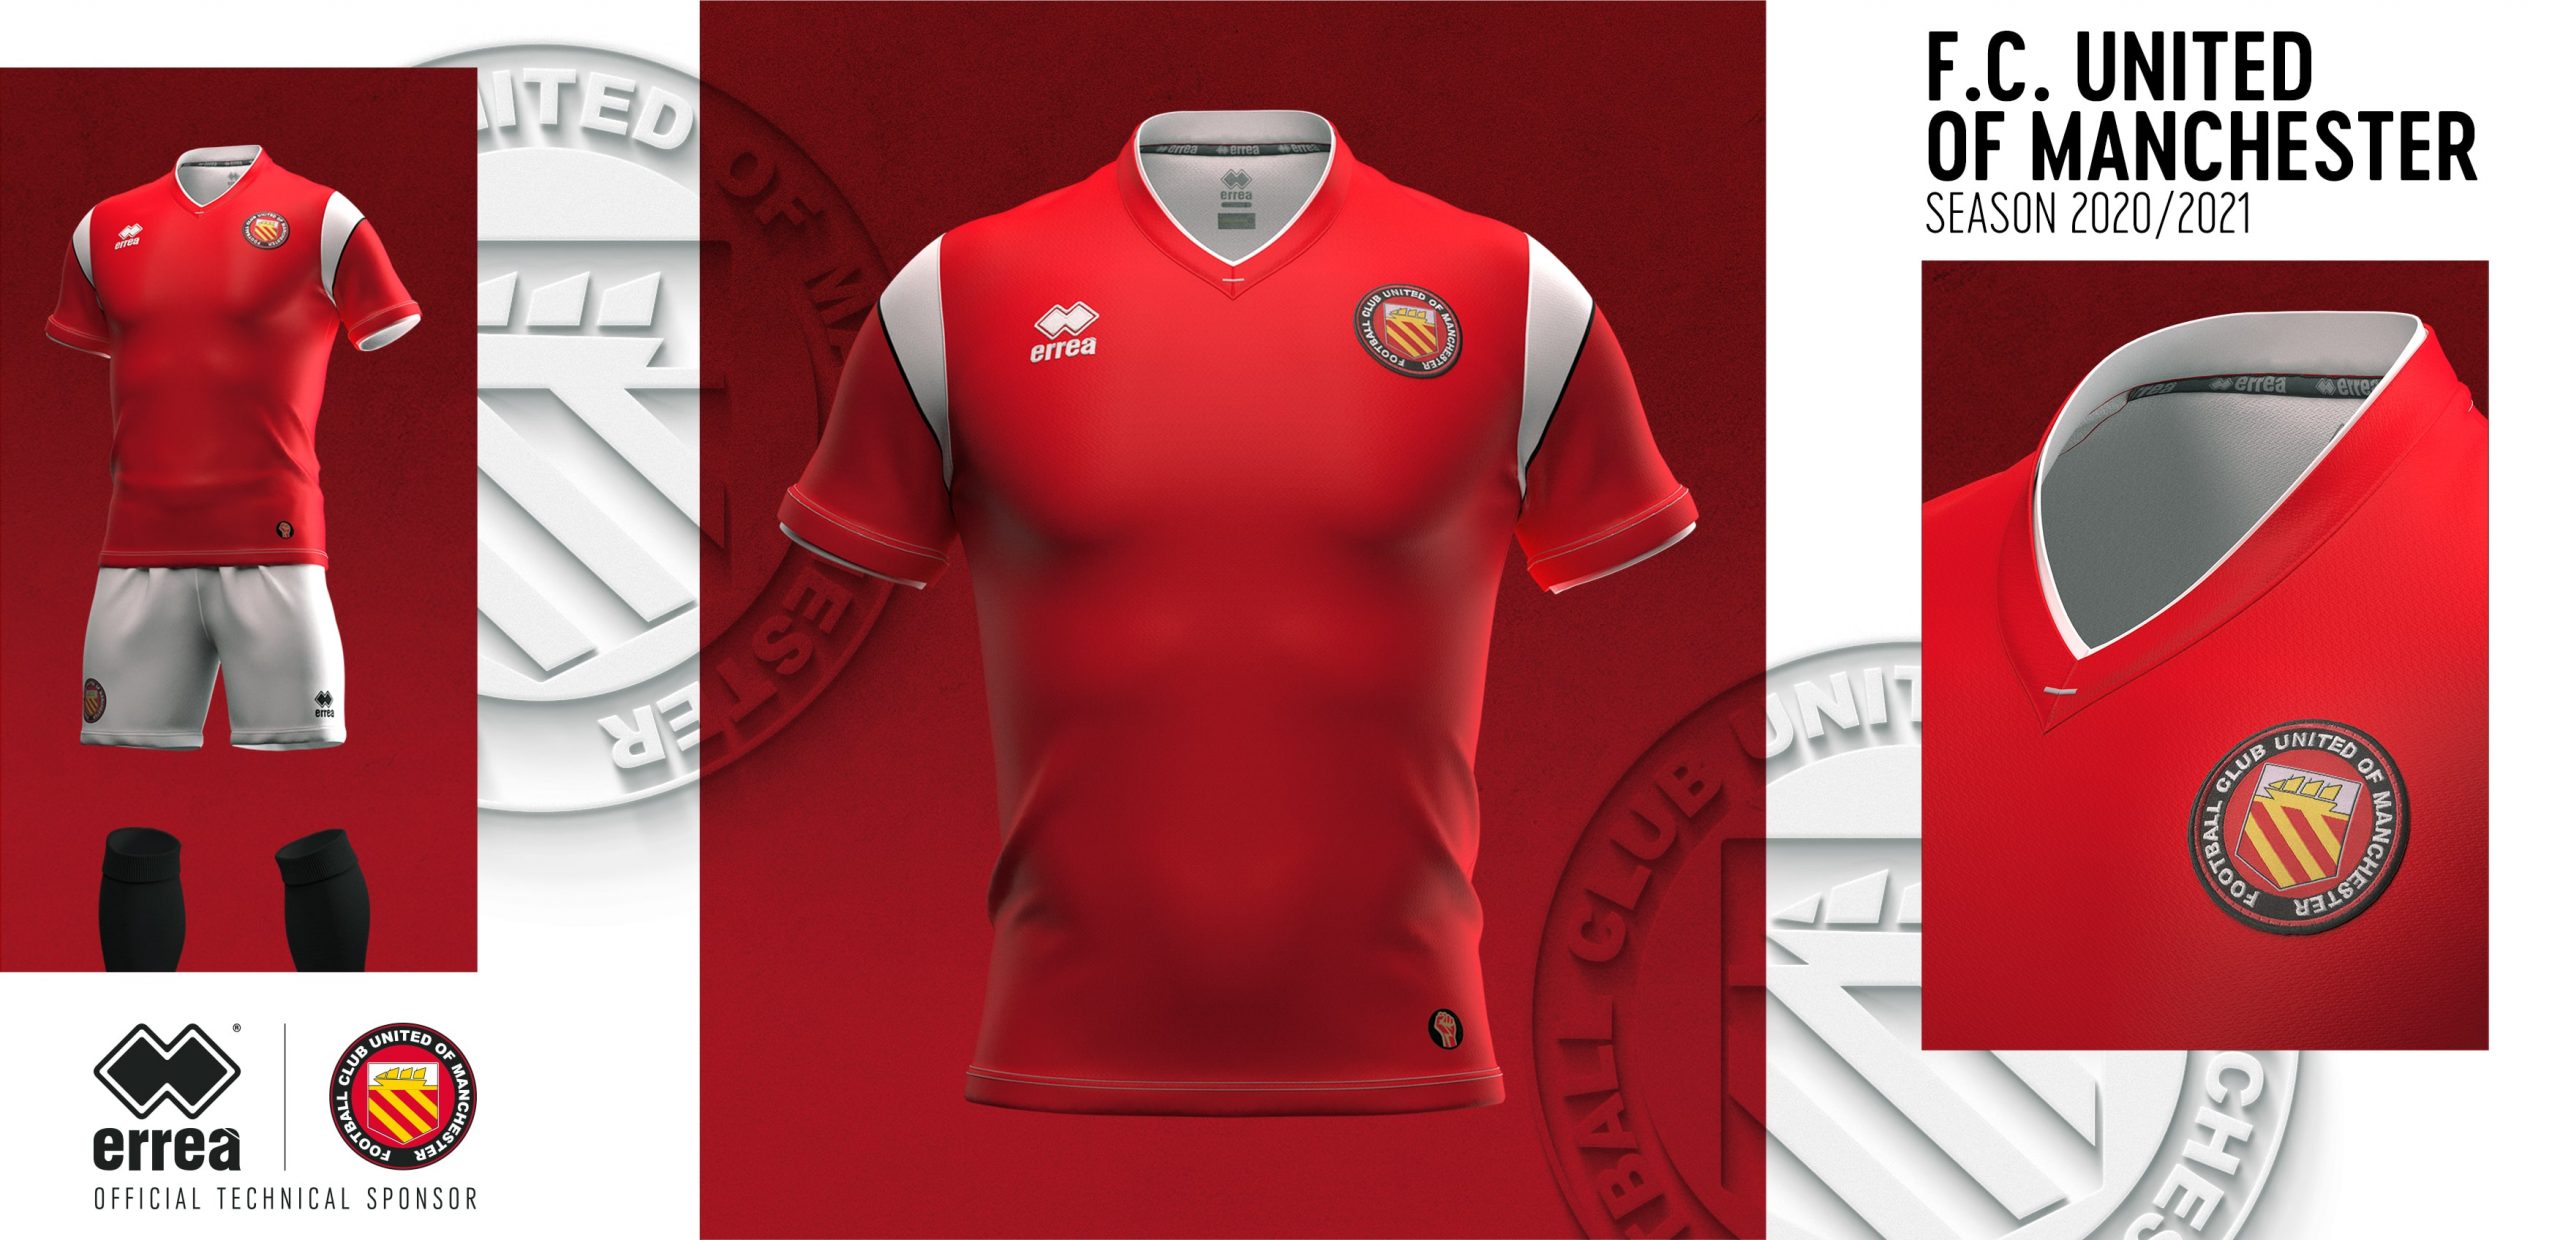 FC United of Manchester kit by Errea 